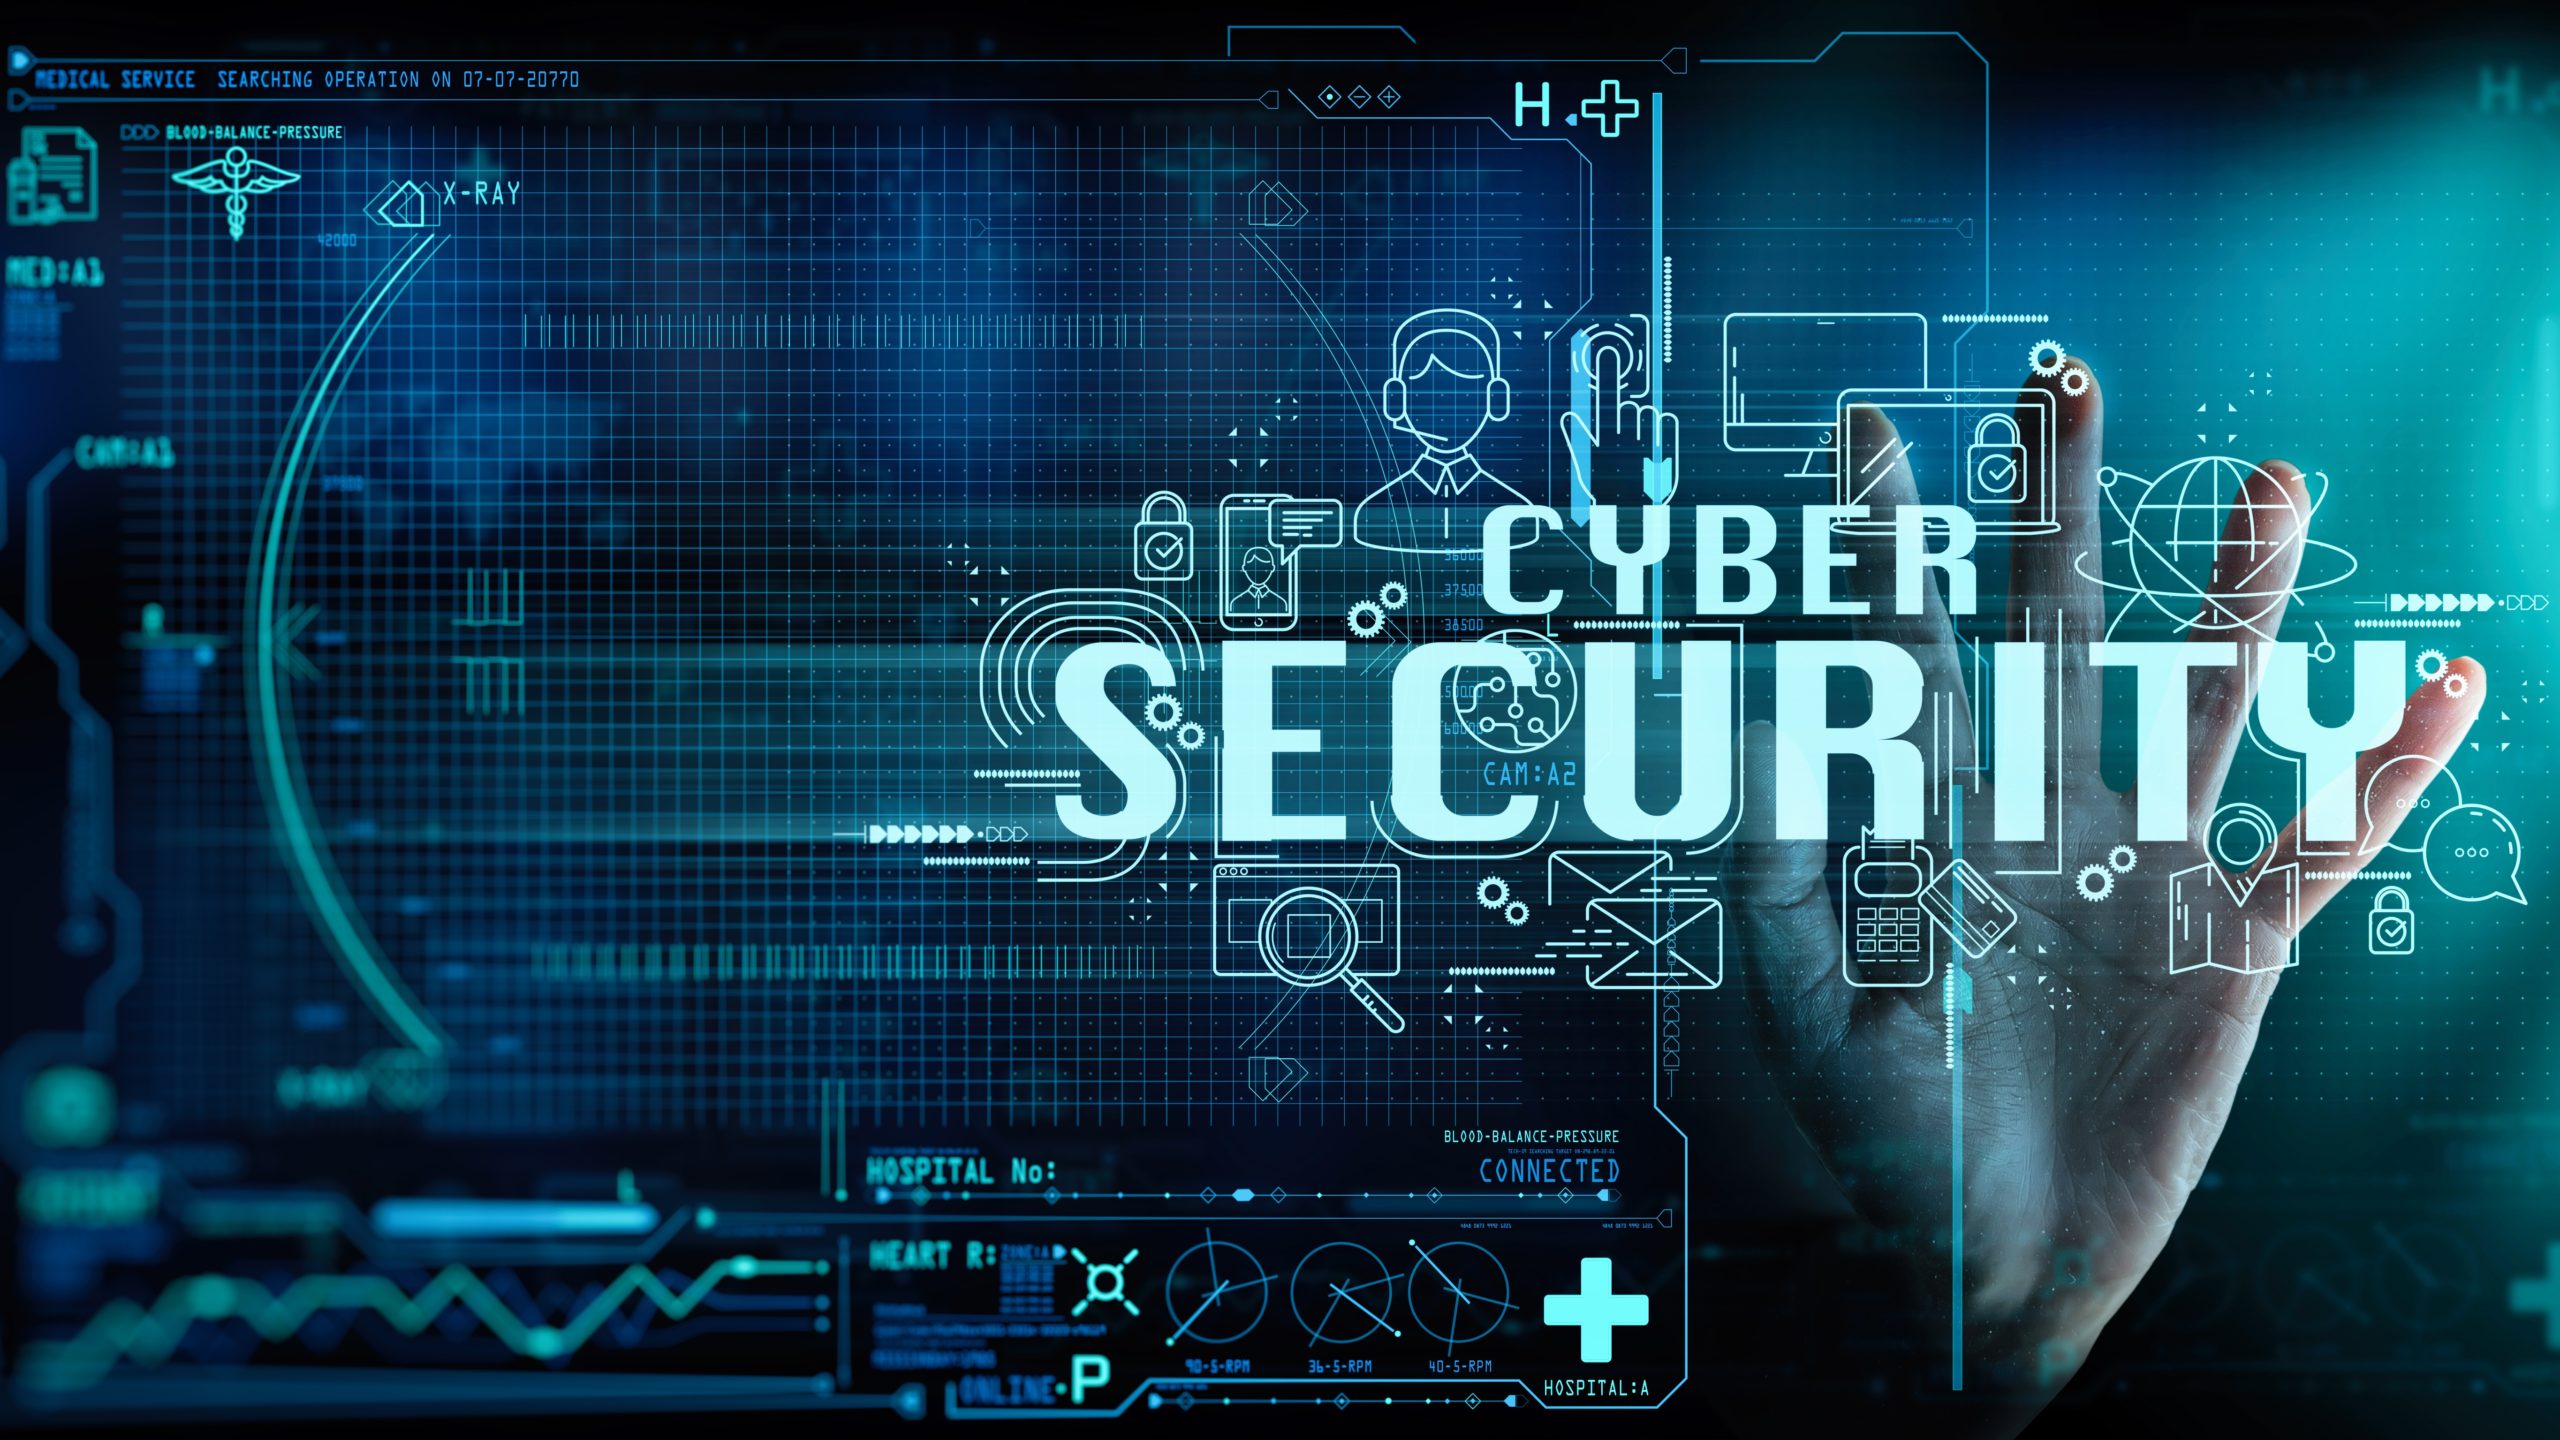 10 cyber security myths for small and medium size businesses debunked